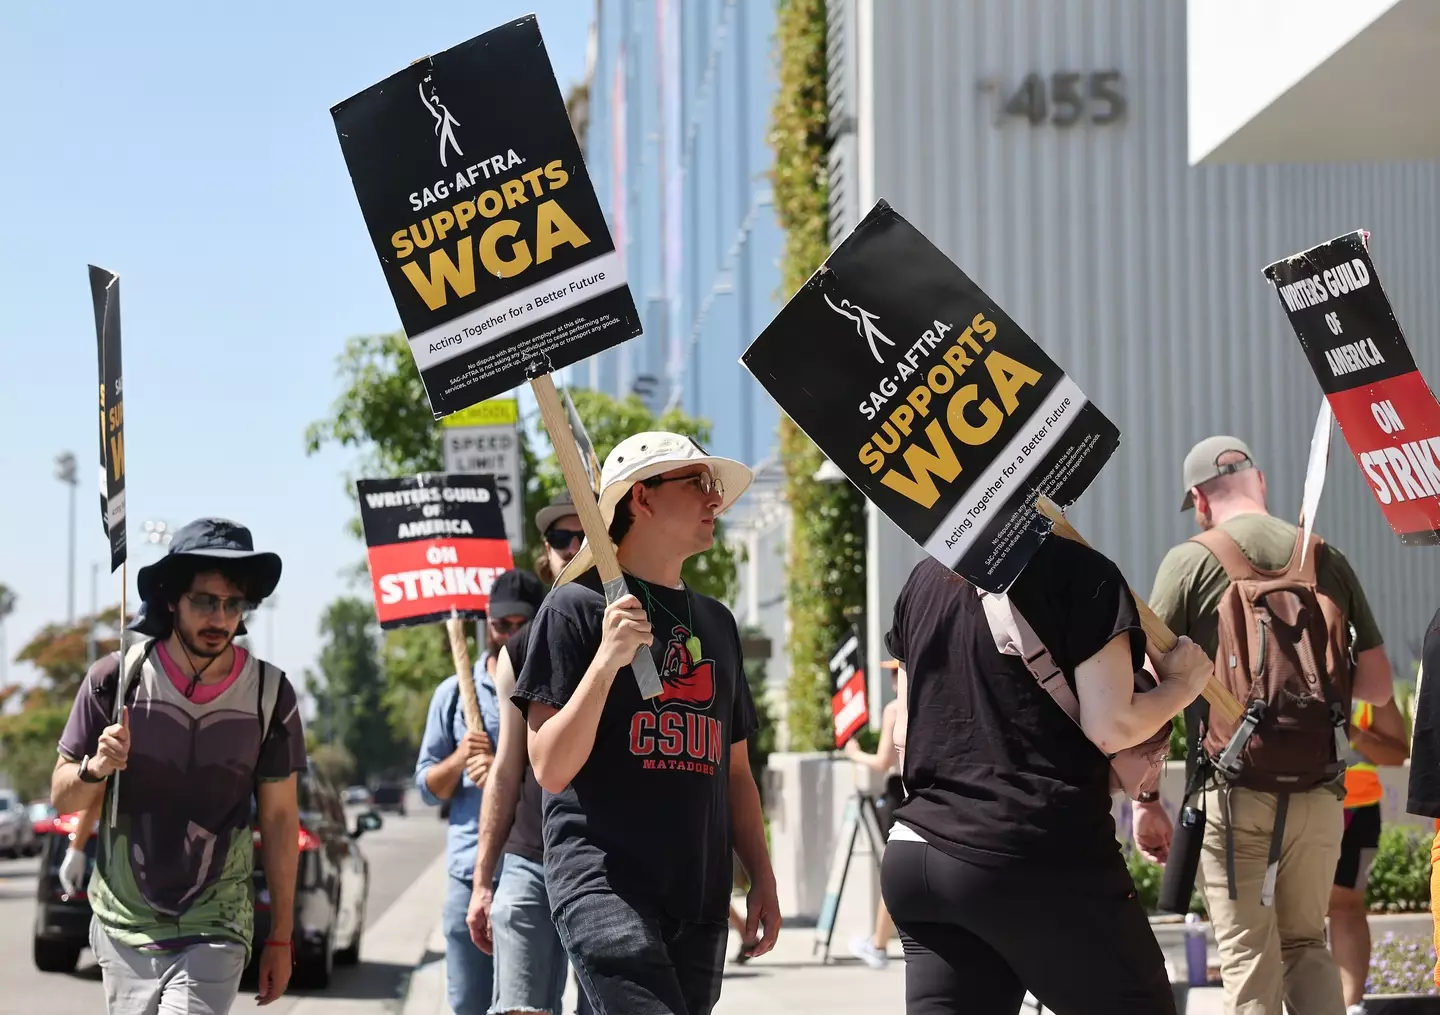 SAG-AFTAR members have joined their writer colleagues from WGA on the picket line.